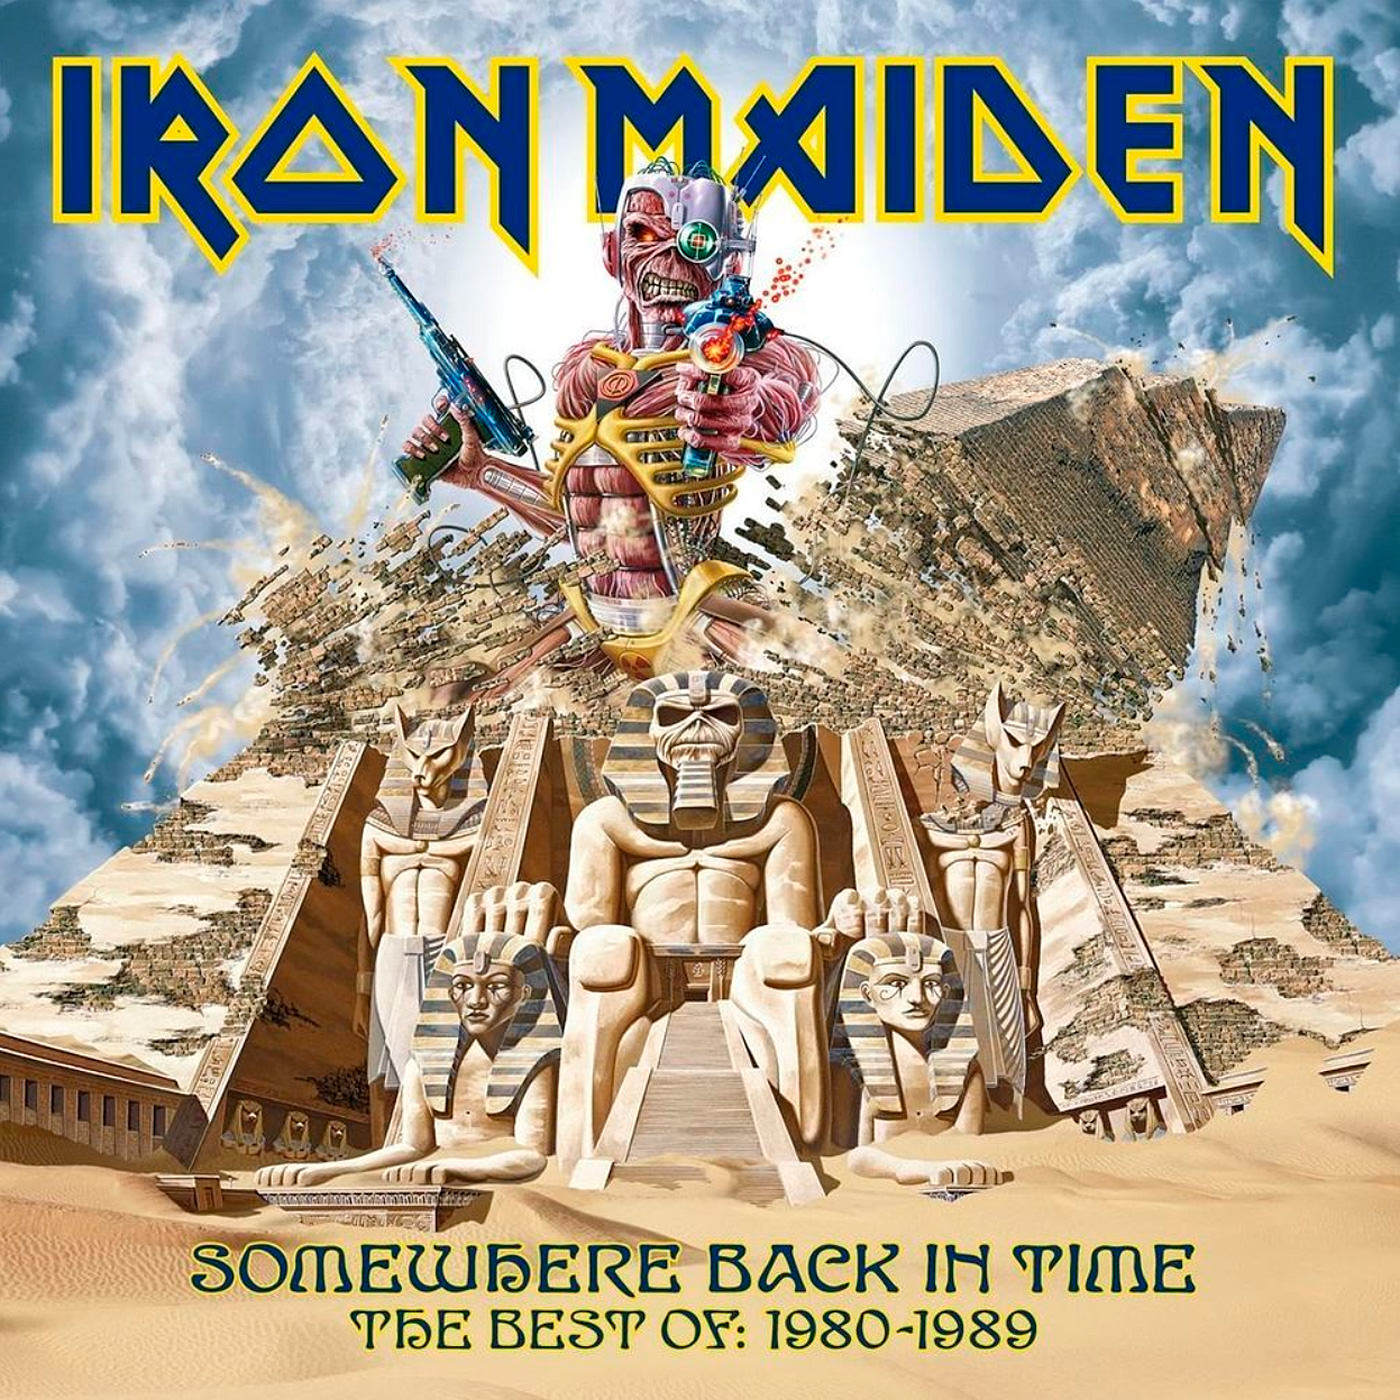 Iron Maiden - Somewhere Back In Time: The Best Of 1990-2010 (2008/2015) [Qobuz FLAC 24bit/48kHz]